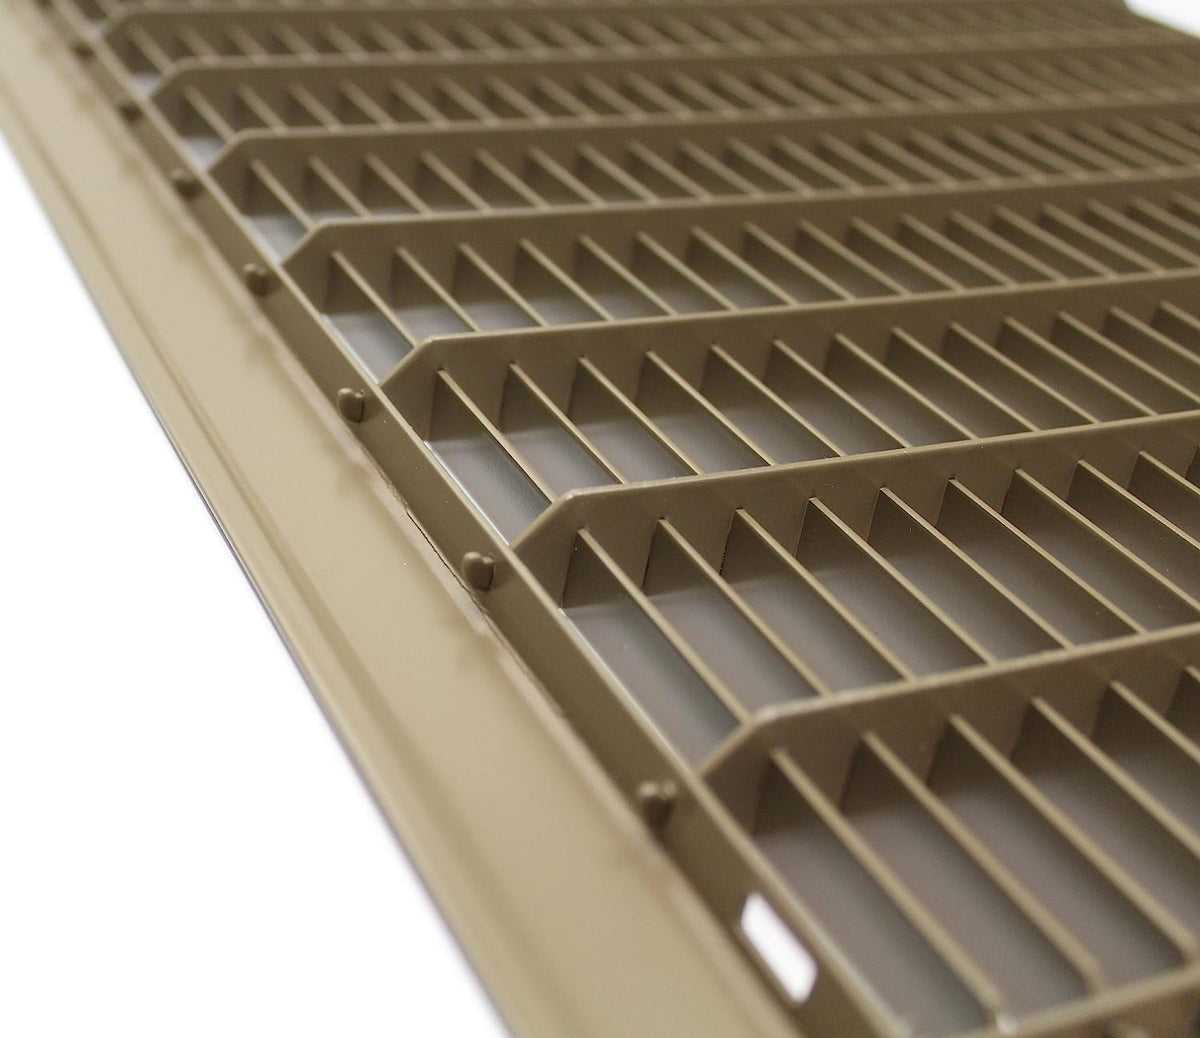 24&quot; X 30&quot; or 30&quot; X 24&quot; Heavy Duty Floor Grille - Fixed Blades Air Grille - Brown [Outer Dimensions: 25.75 X 31.75]